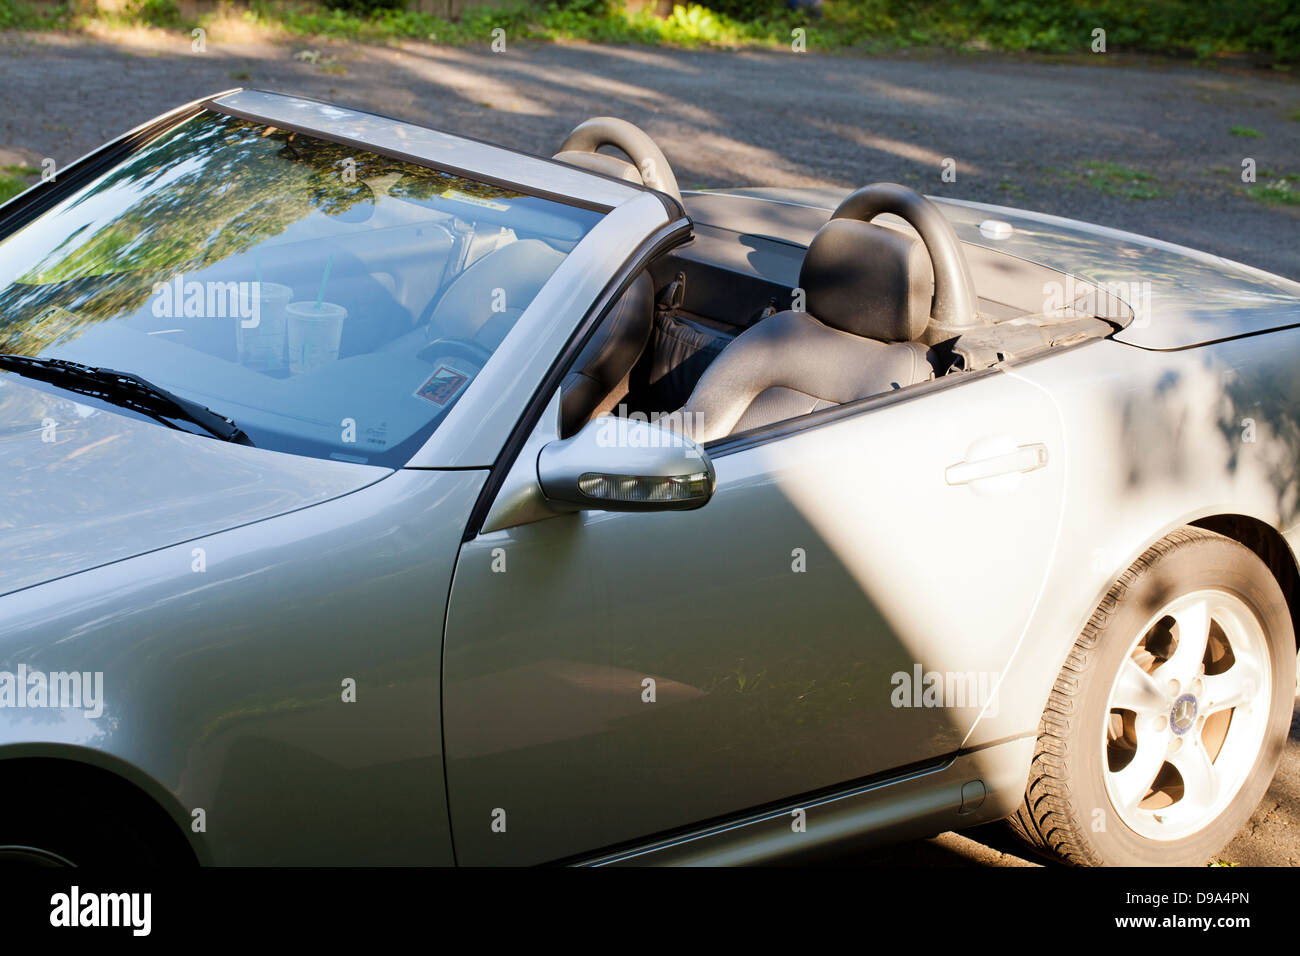 Two seat convertible car Stock Photo